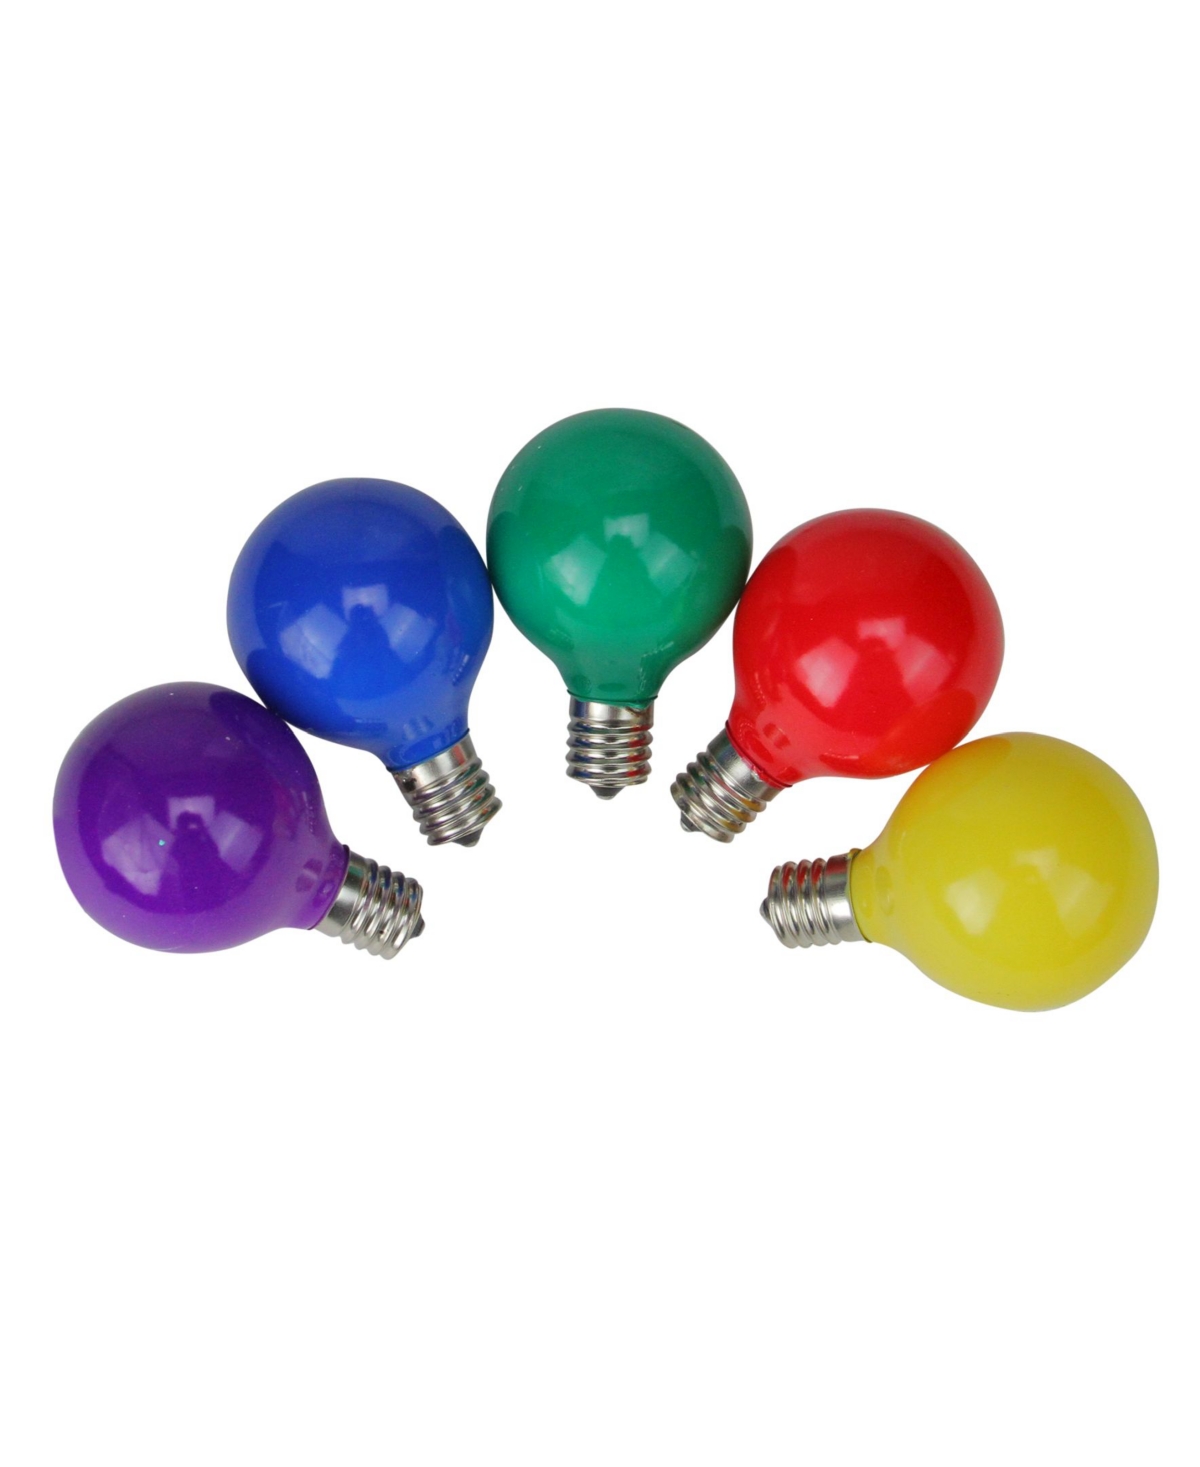 Pack of 10 Multi-Color Satin G50 Globe Christmas Replacement Bulbs - Multi